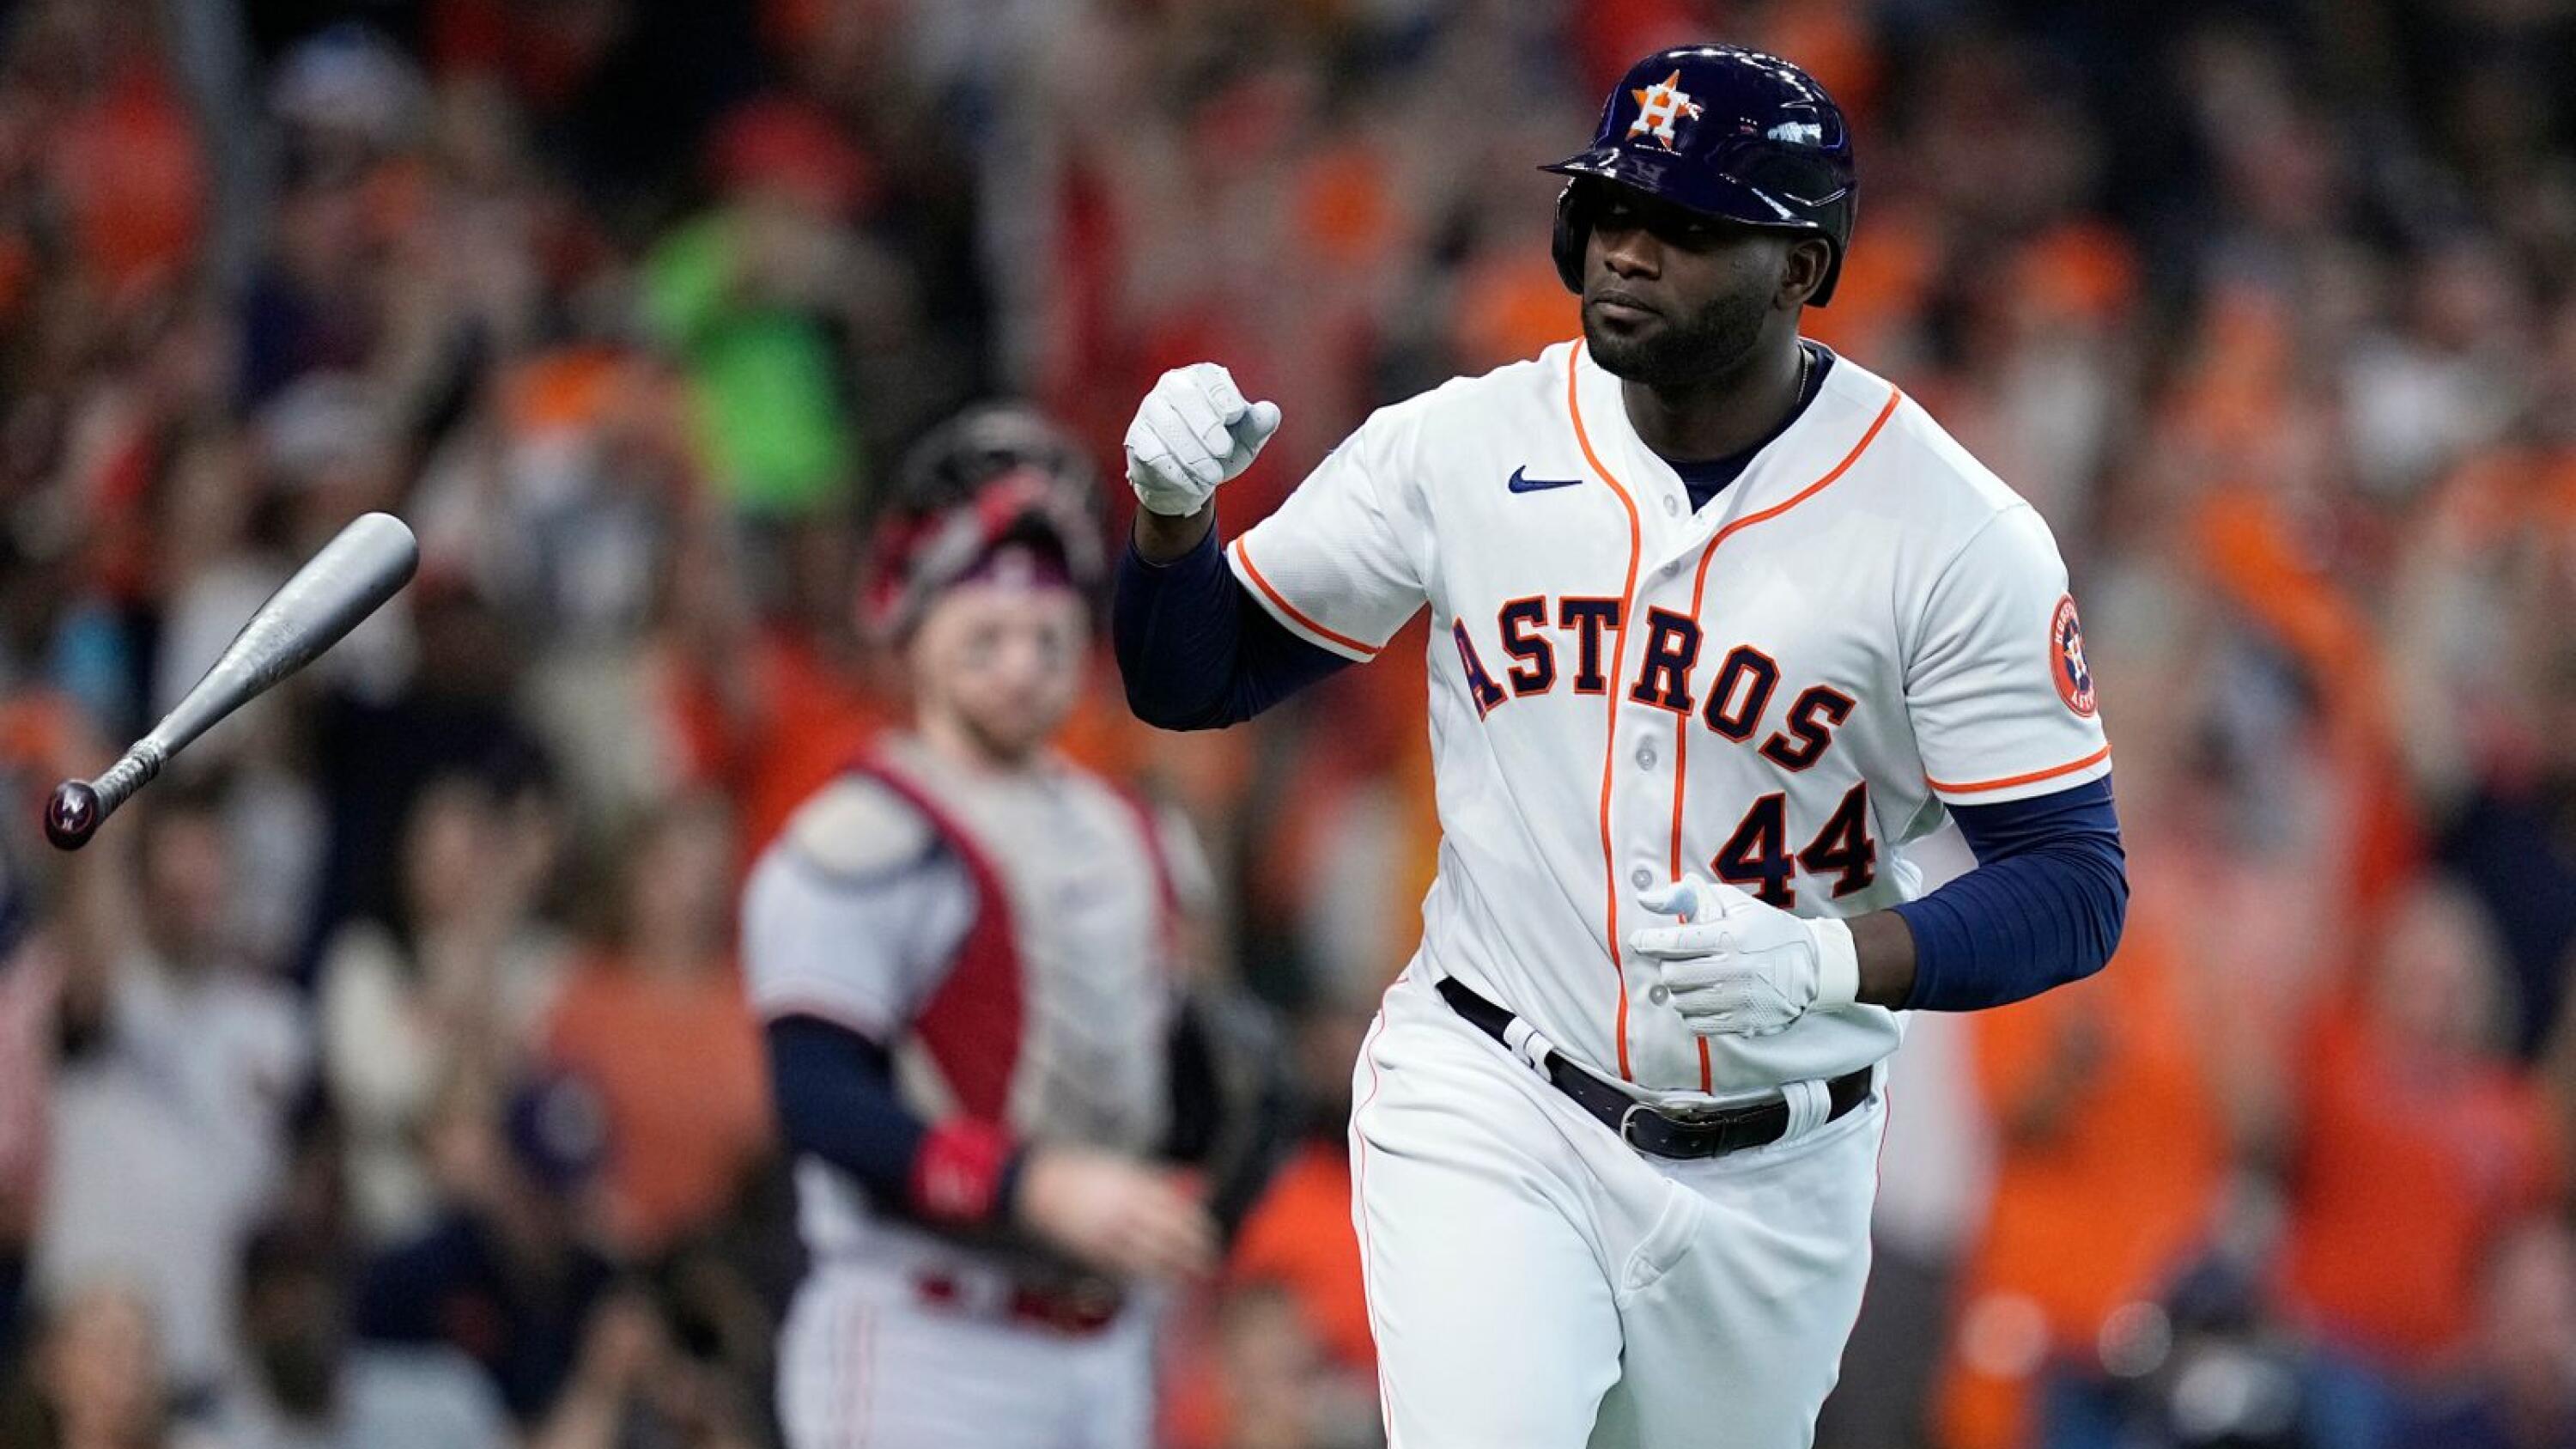 Altuve and Javier lead Astros to 8-5 win at Rangers as Houston closes to  2-1 in ALCS